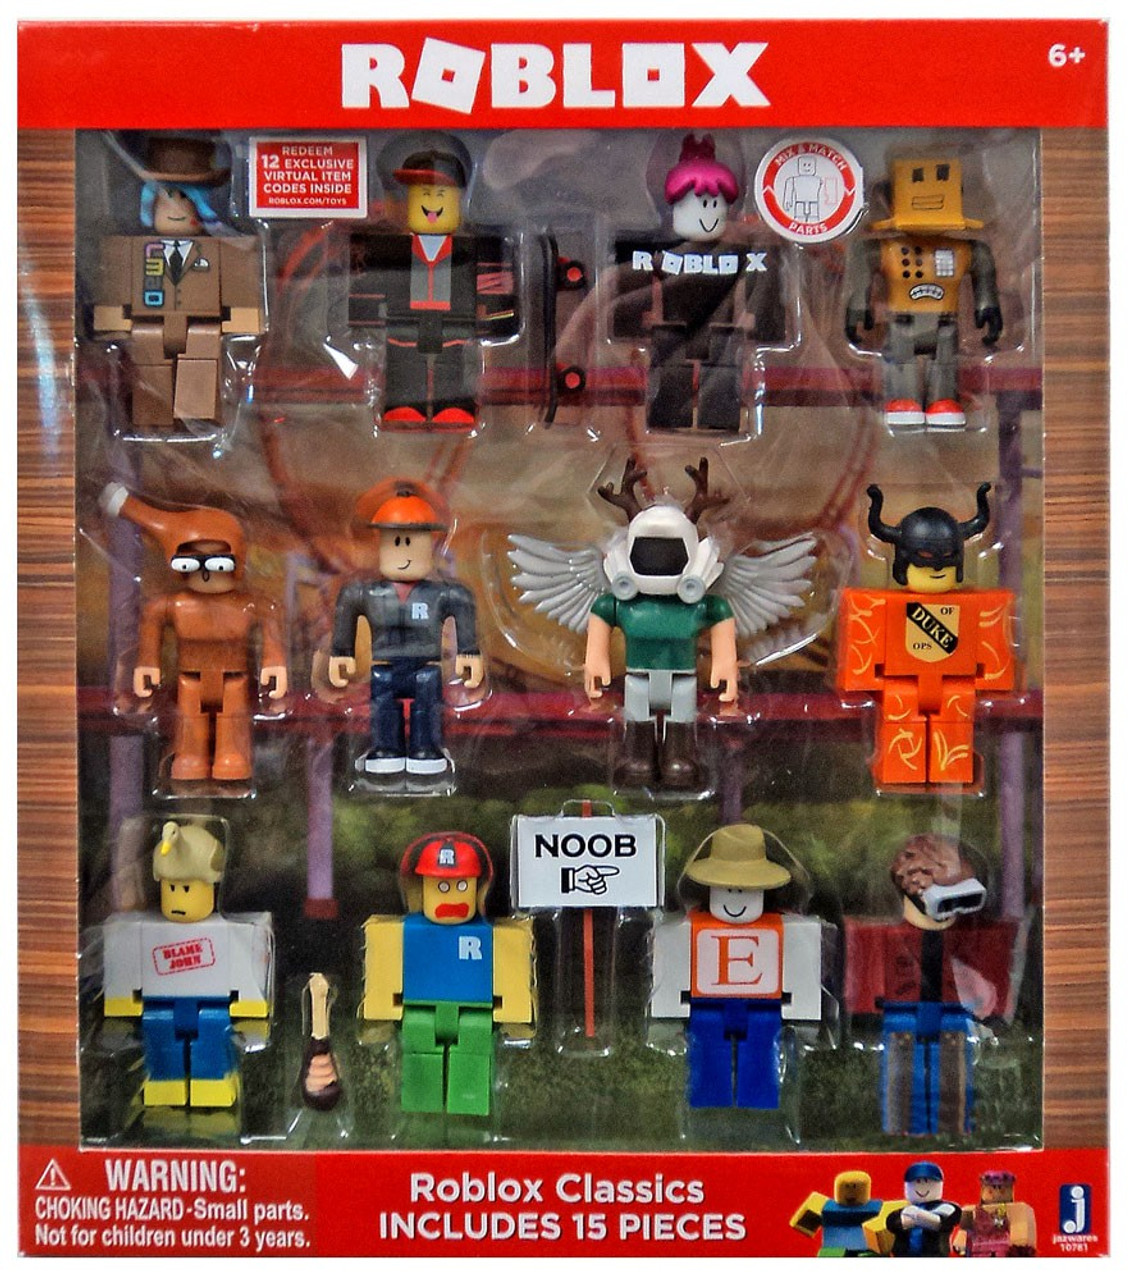 Roblox Series 1 Roblox Classics Exclusive 3 Action Figure 12 Pack Includes 12 Online Item Codes Jazwares Toywiz - roblox series 1 collectible action figures blind pack